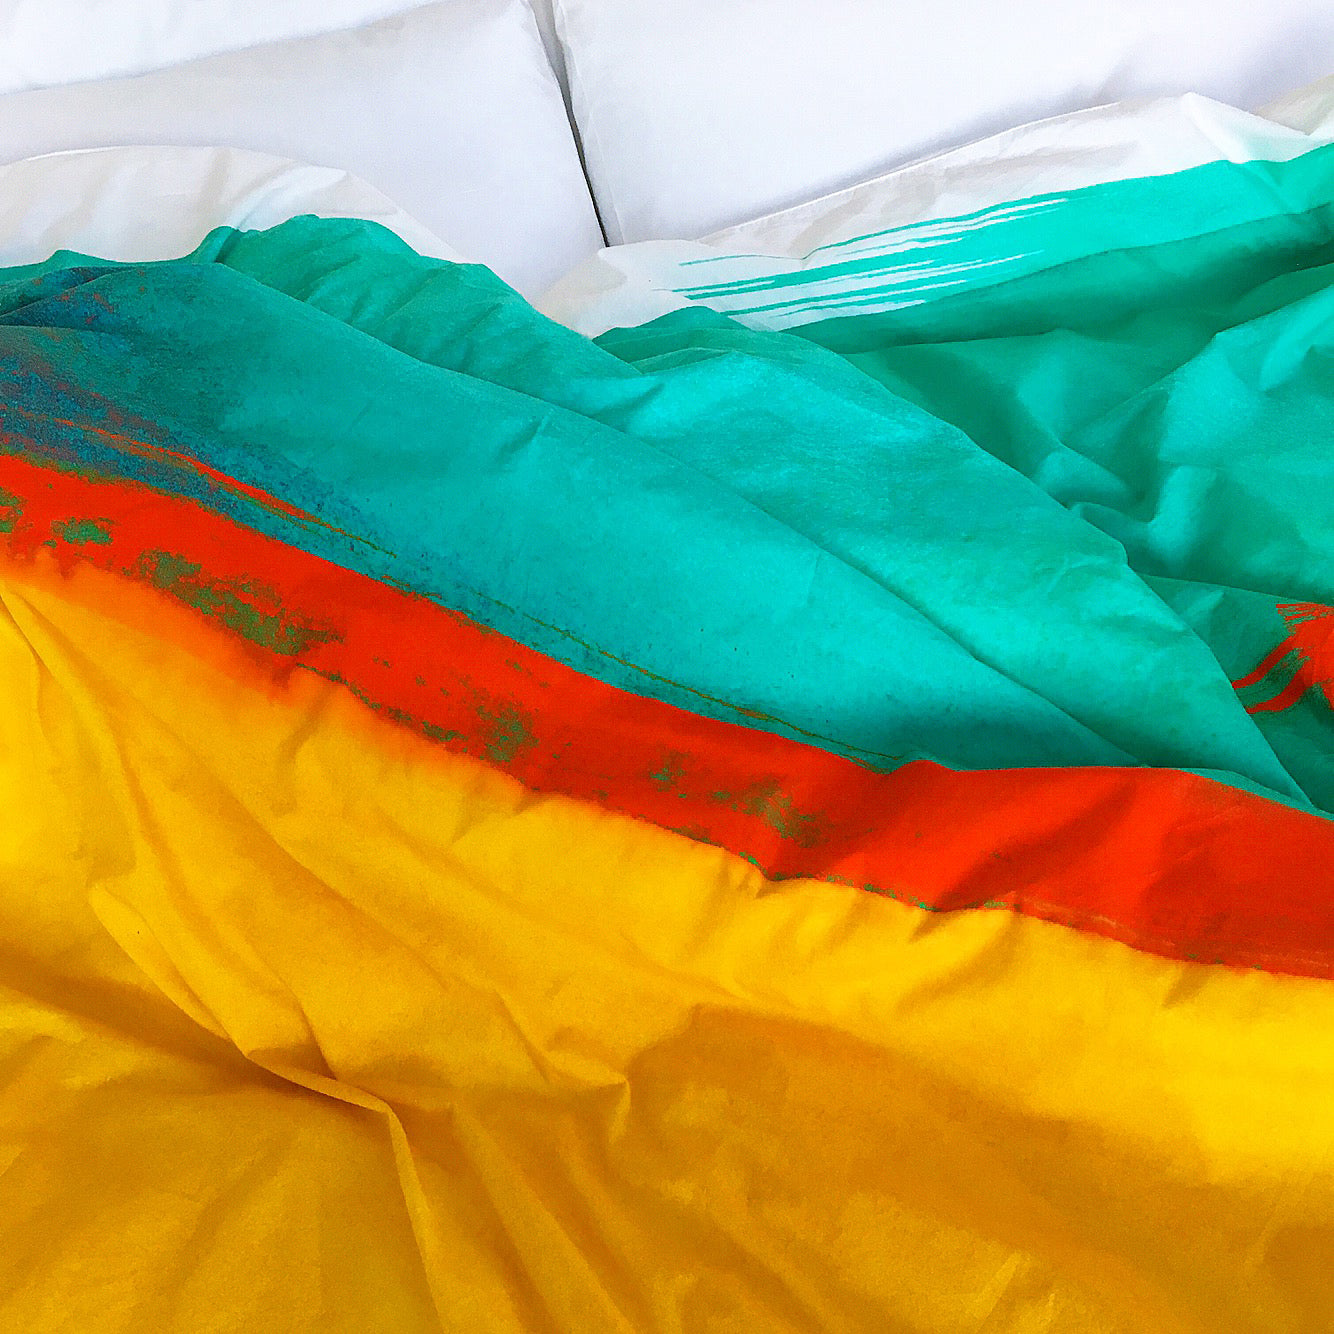 ZayZay duvet cover Morrocan Monday detail bright yellow, orange-red, turquoise colours